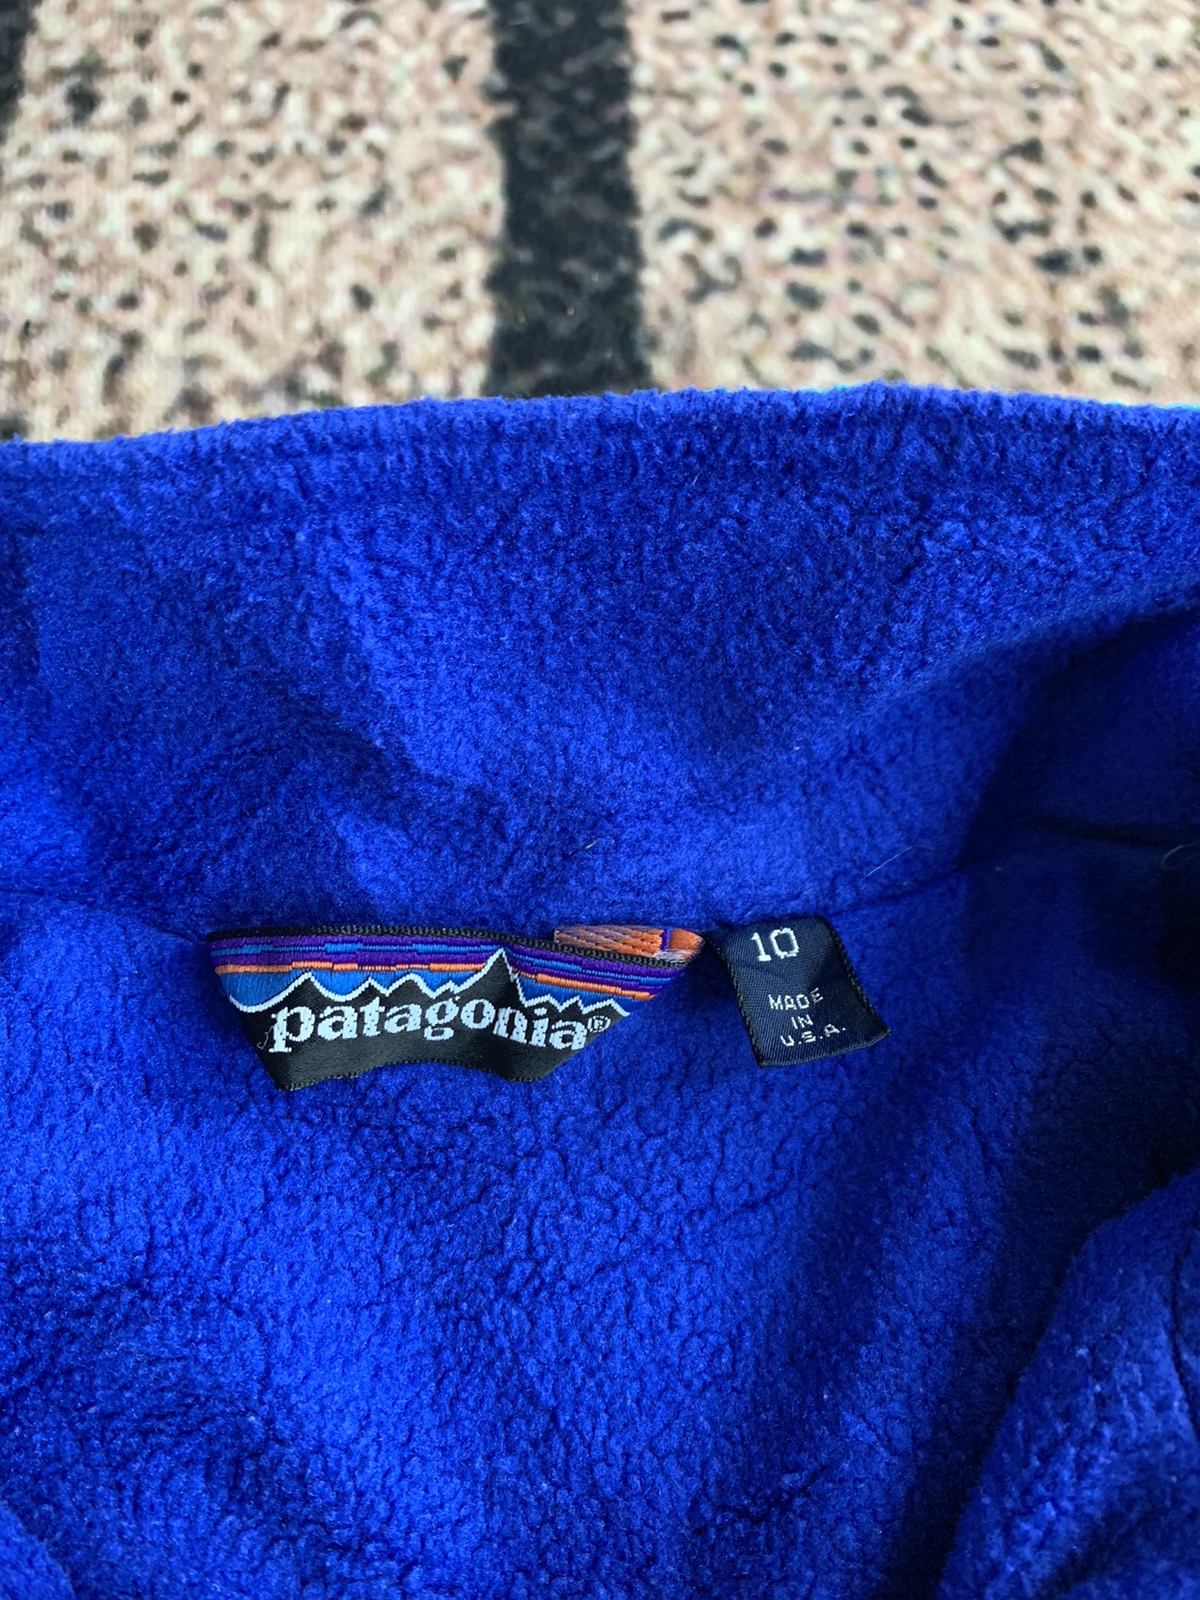 patagonia bomber jacket for 10 years old kids - 11